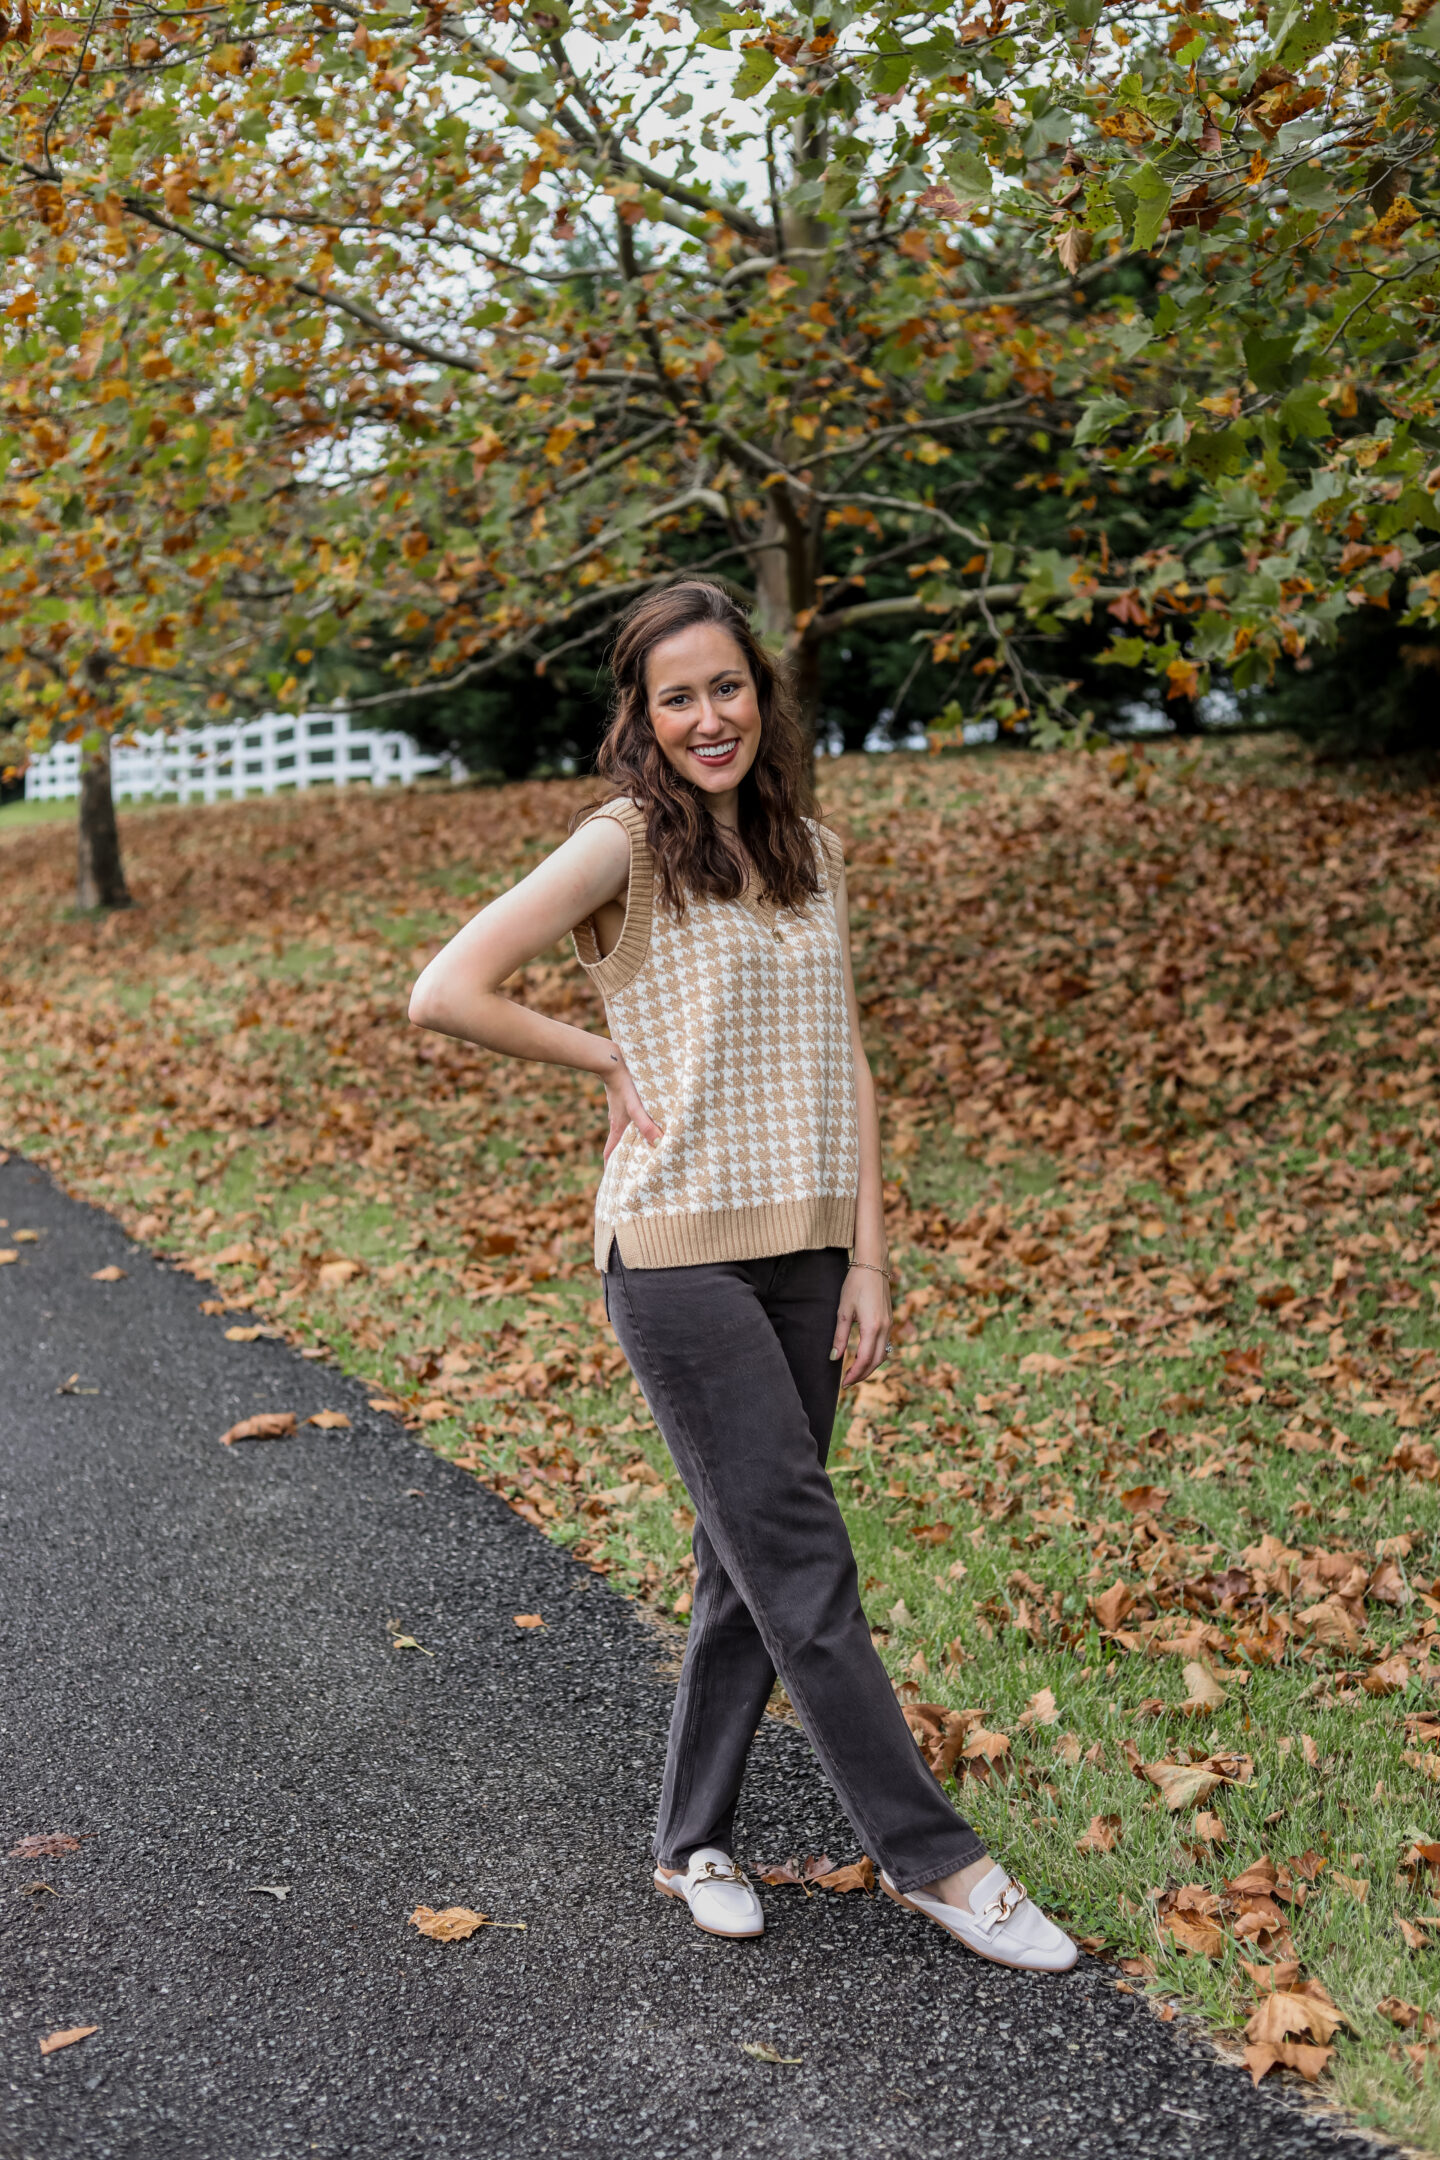 HOW TO WEAR A SWEATER VEST - Transitional Fall Outfit Idea on Coming Up Roses